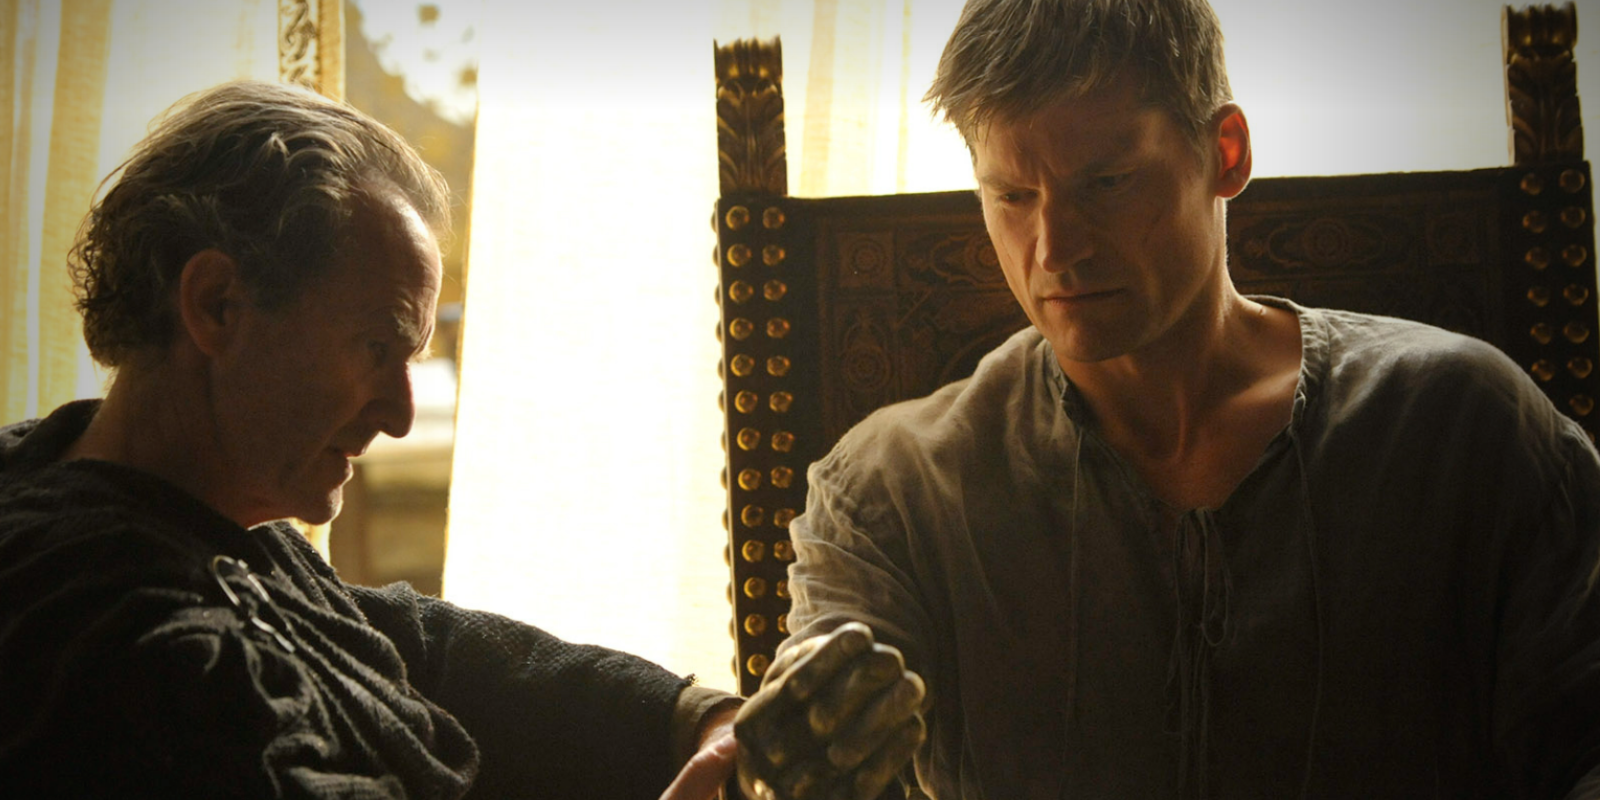 Jaime Lannister gets his golden hand fitted